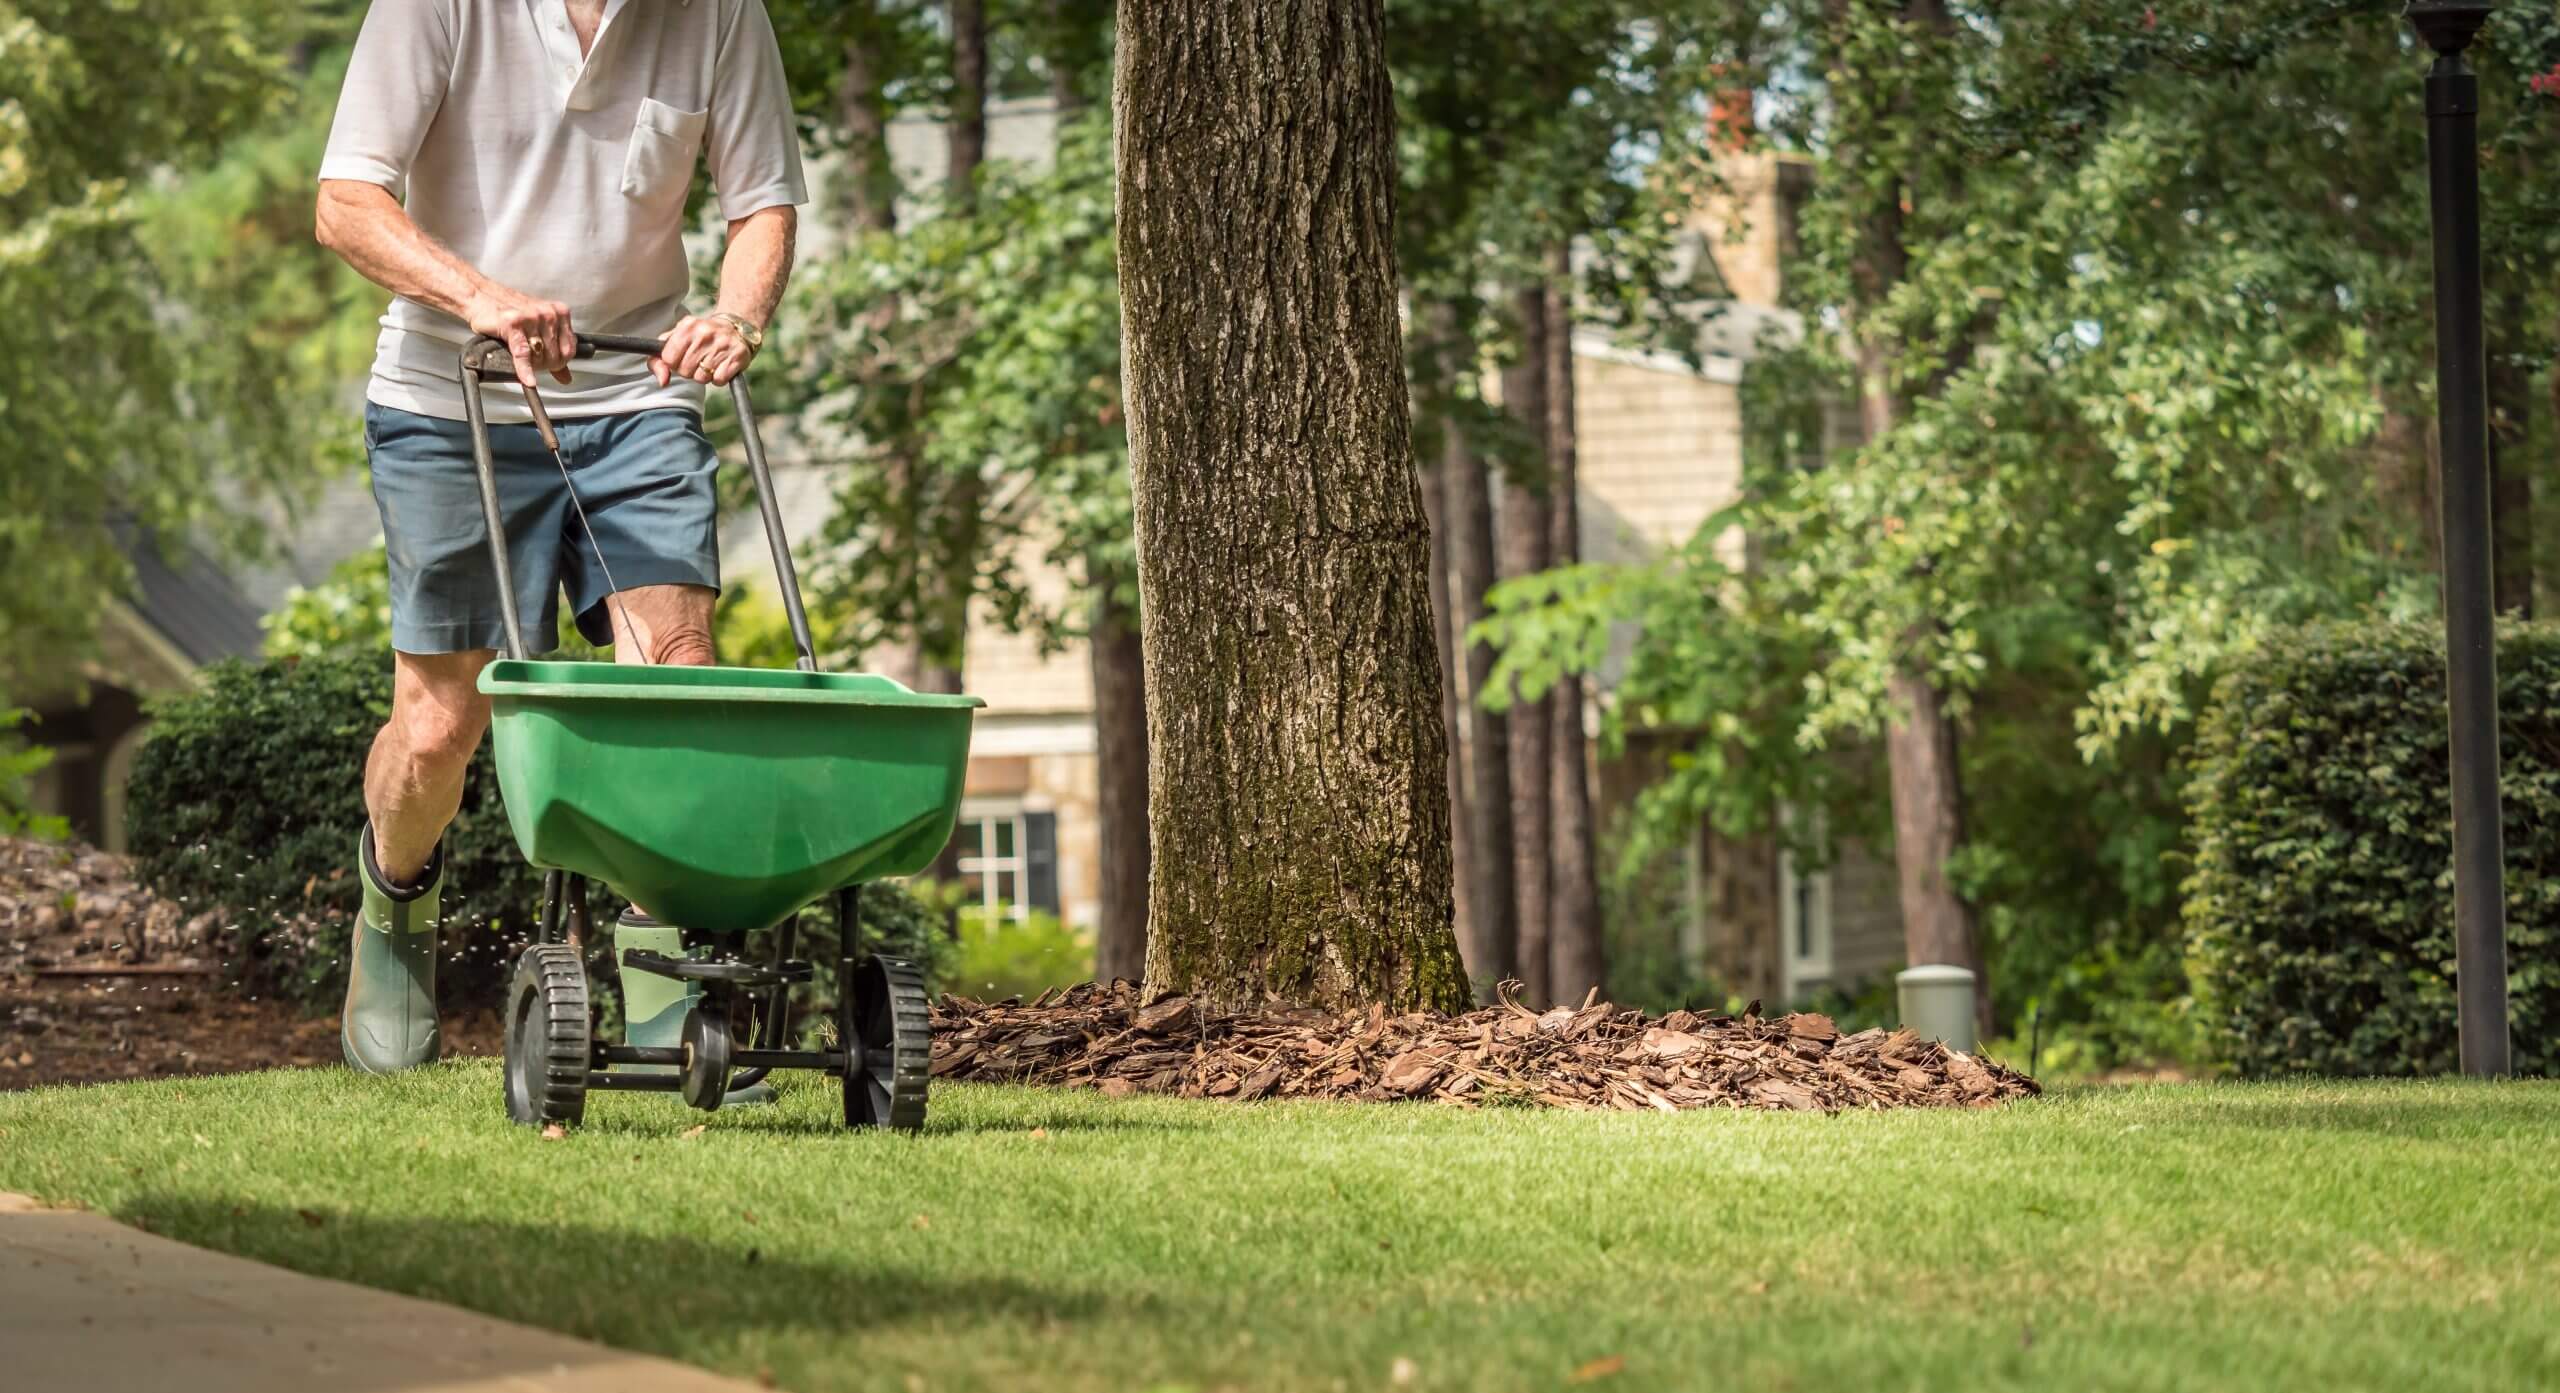 Man seeding and fertilizing residential backyard lawn with manual grass seed spreader.